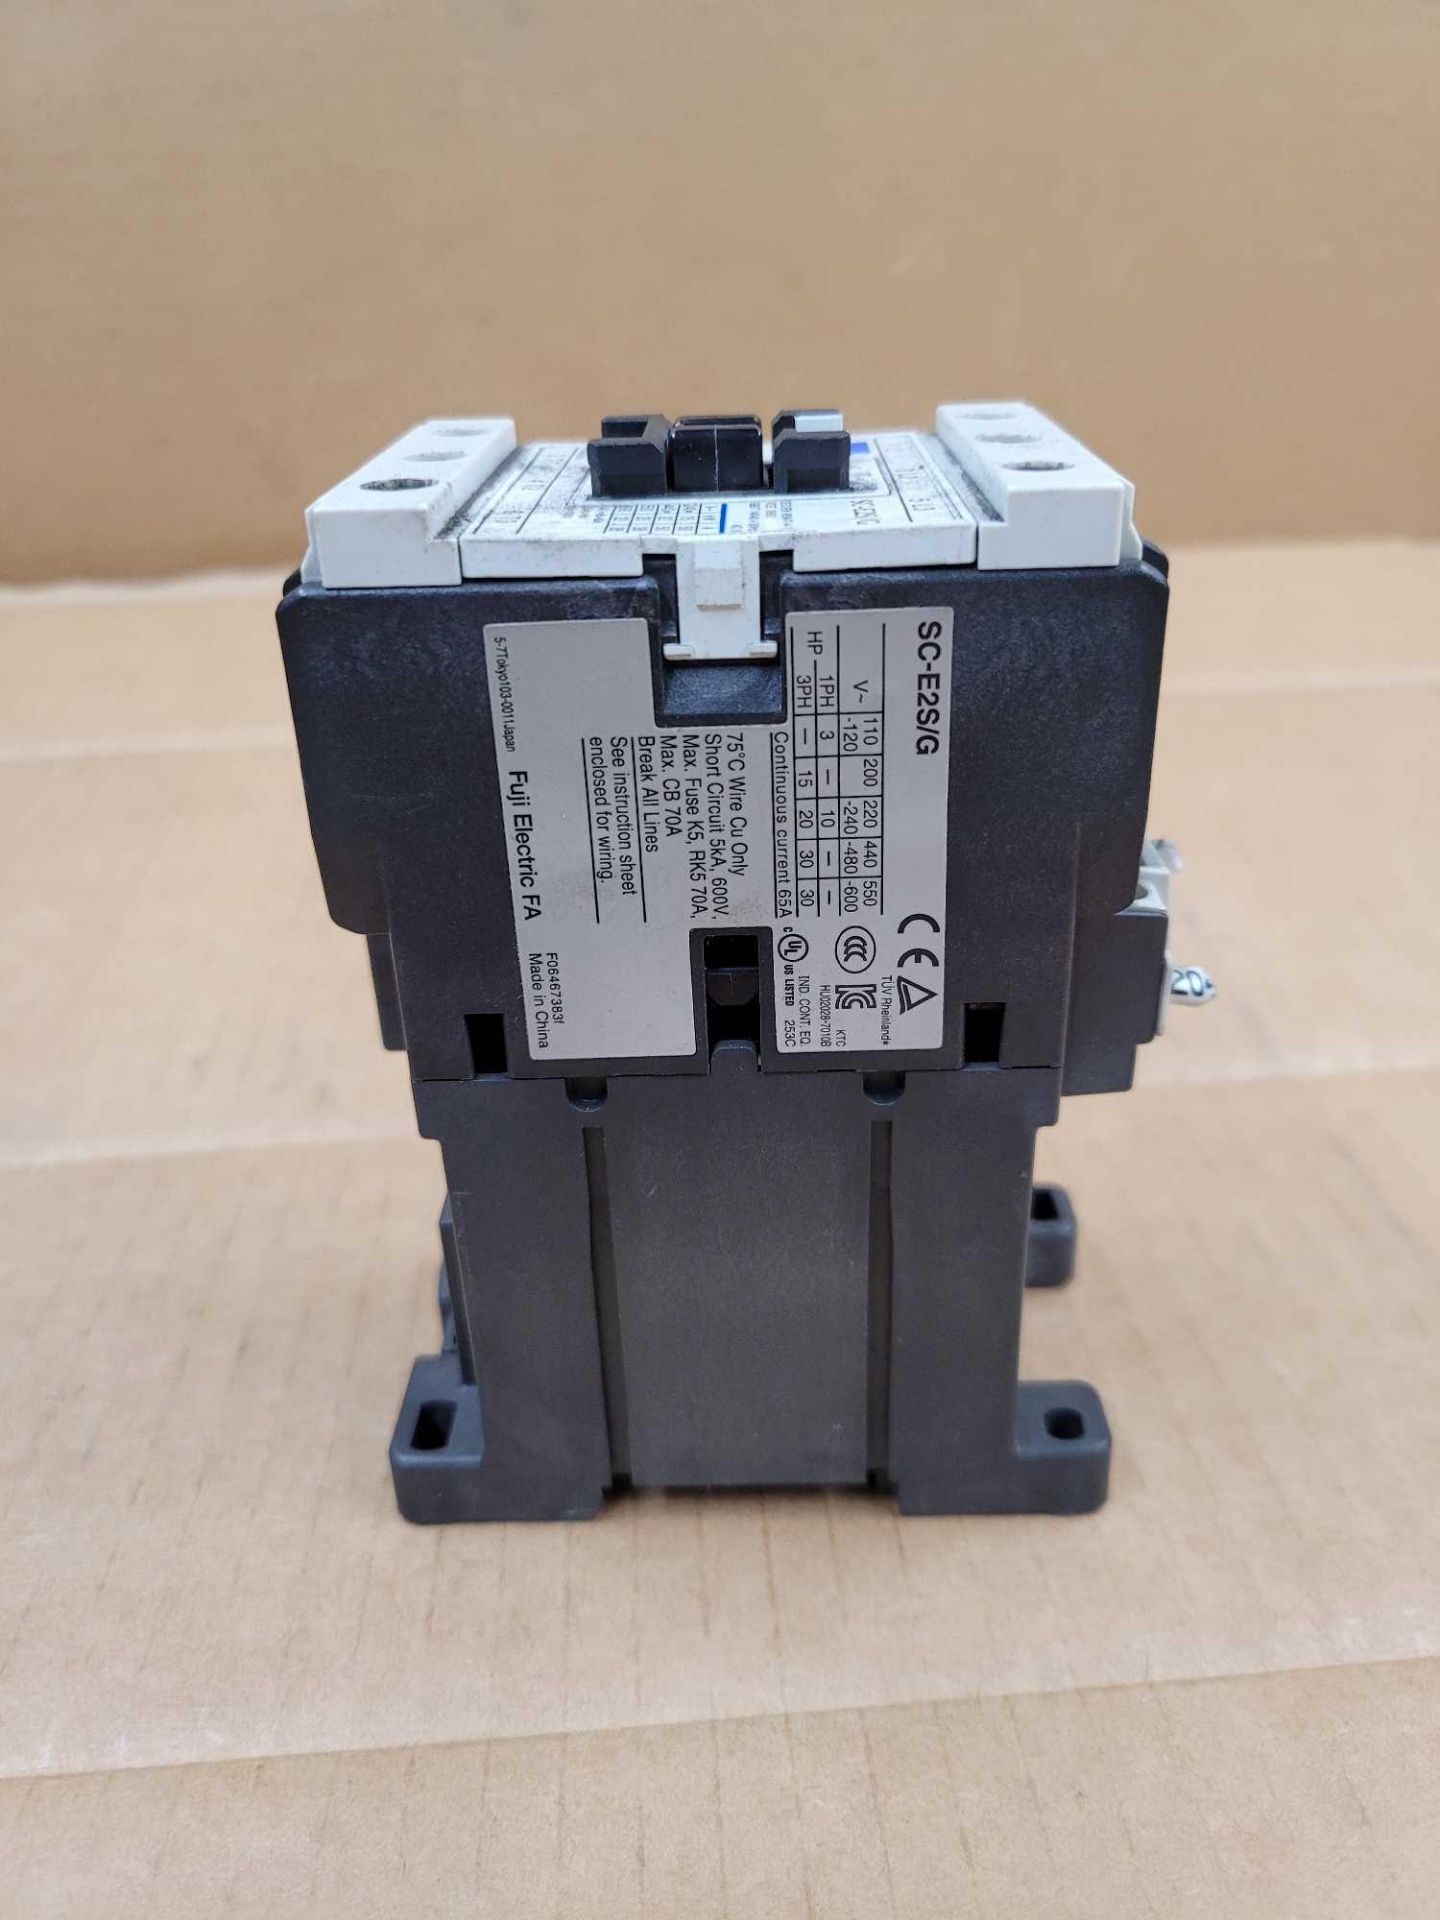 LOT OF 5 SC-E2S/G  /  Contactor  /  Lot Weight: 9.0 lbs - Image 4 of 9